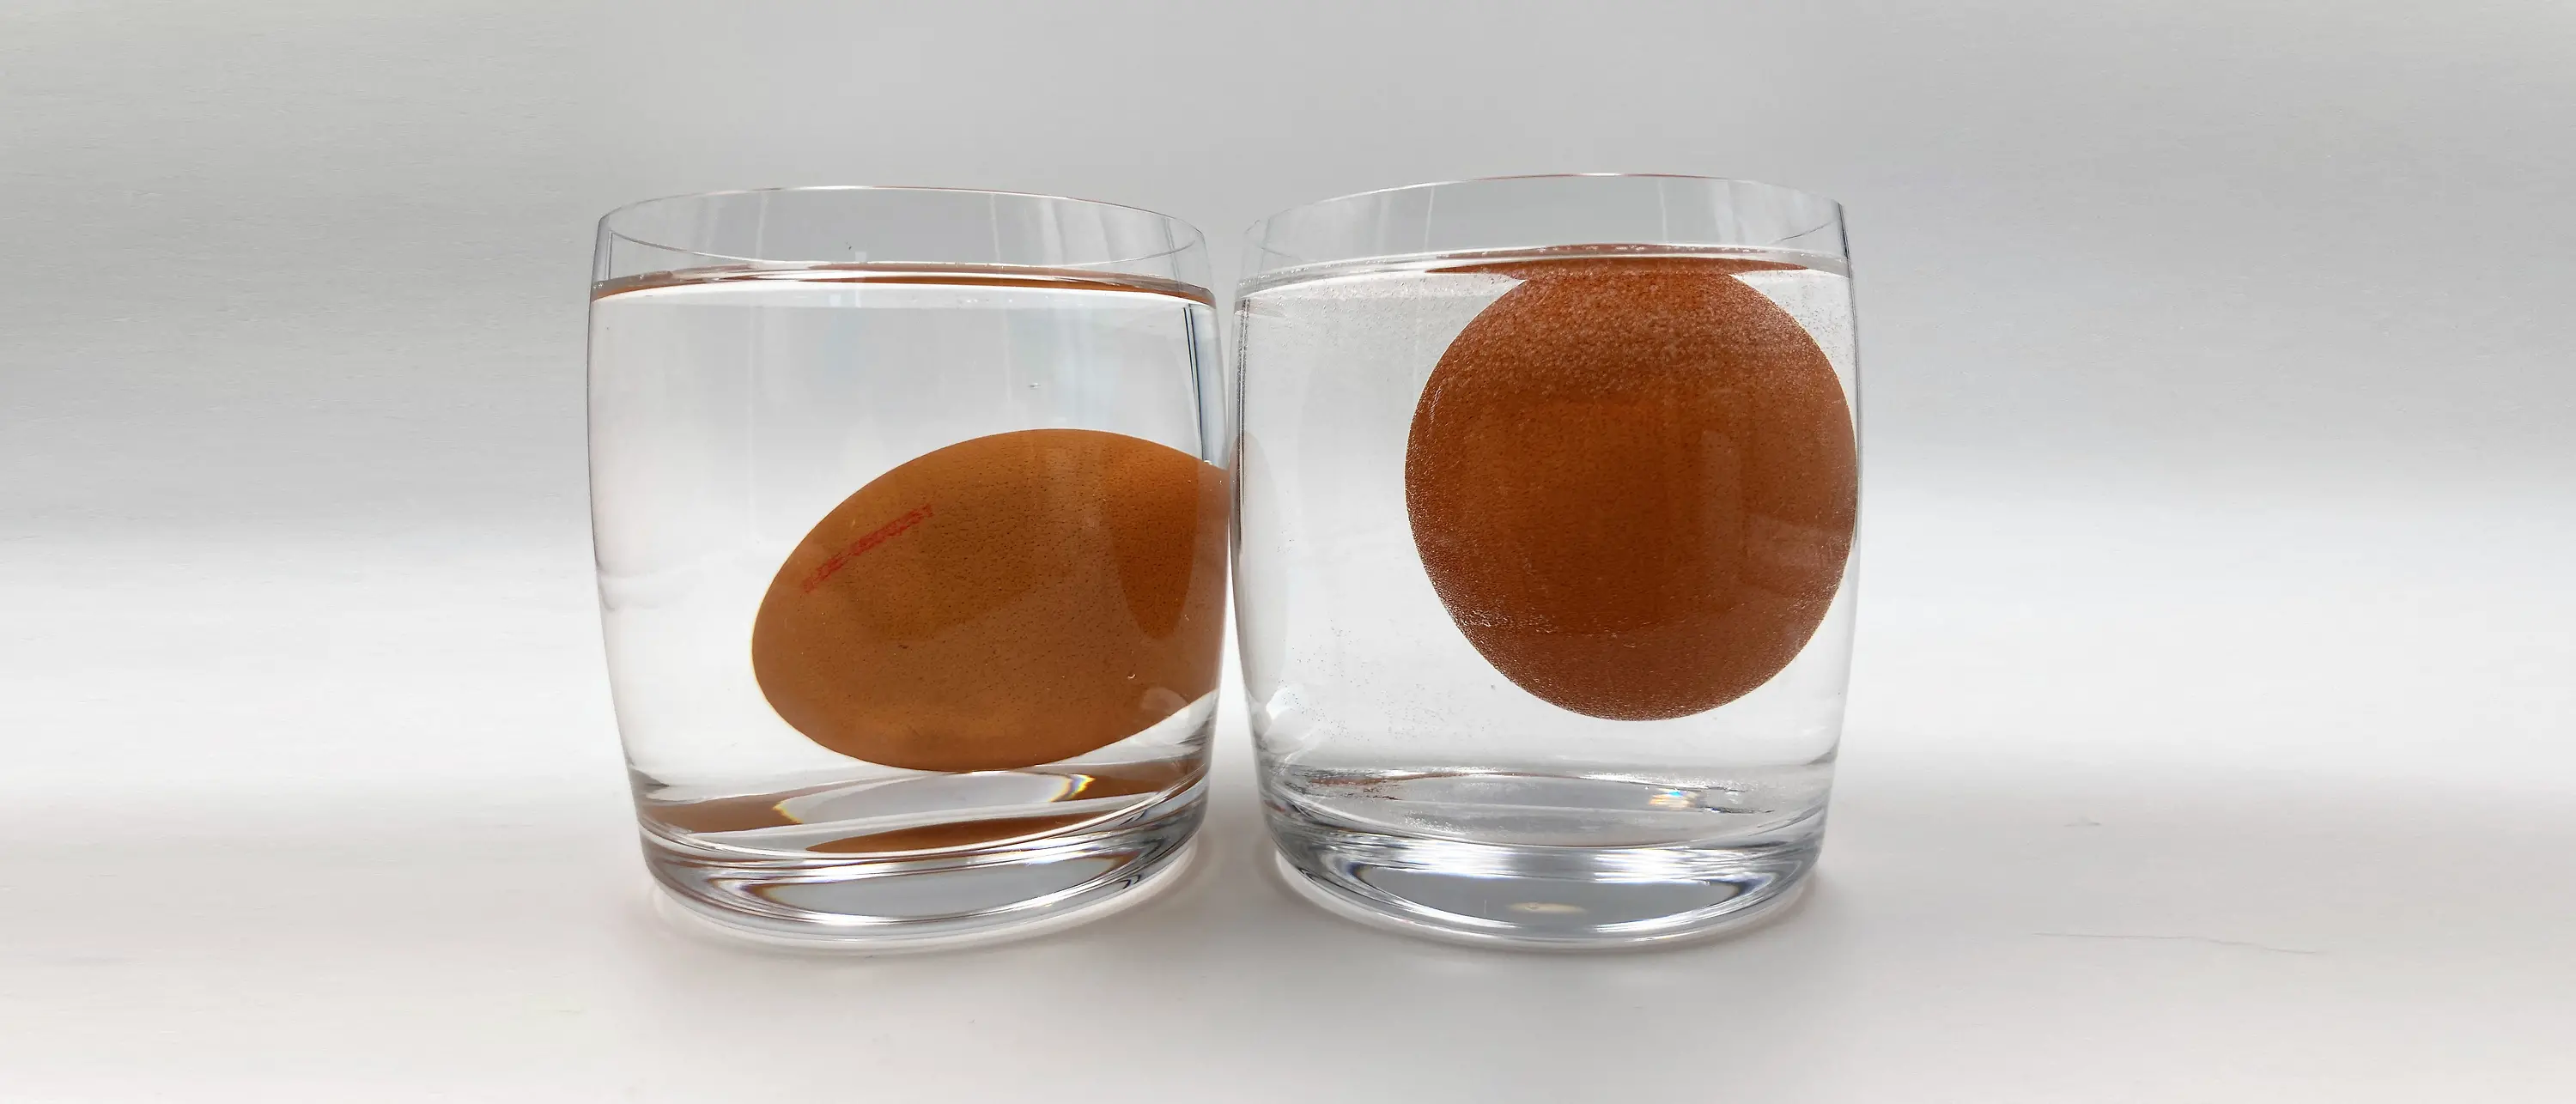 Two glasses each filled with water and an egg, one egg floats